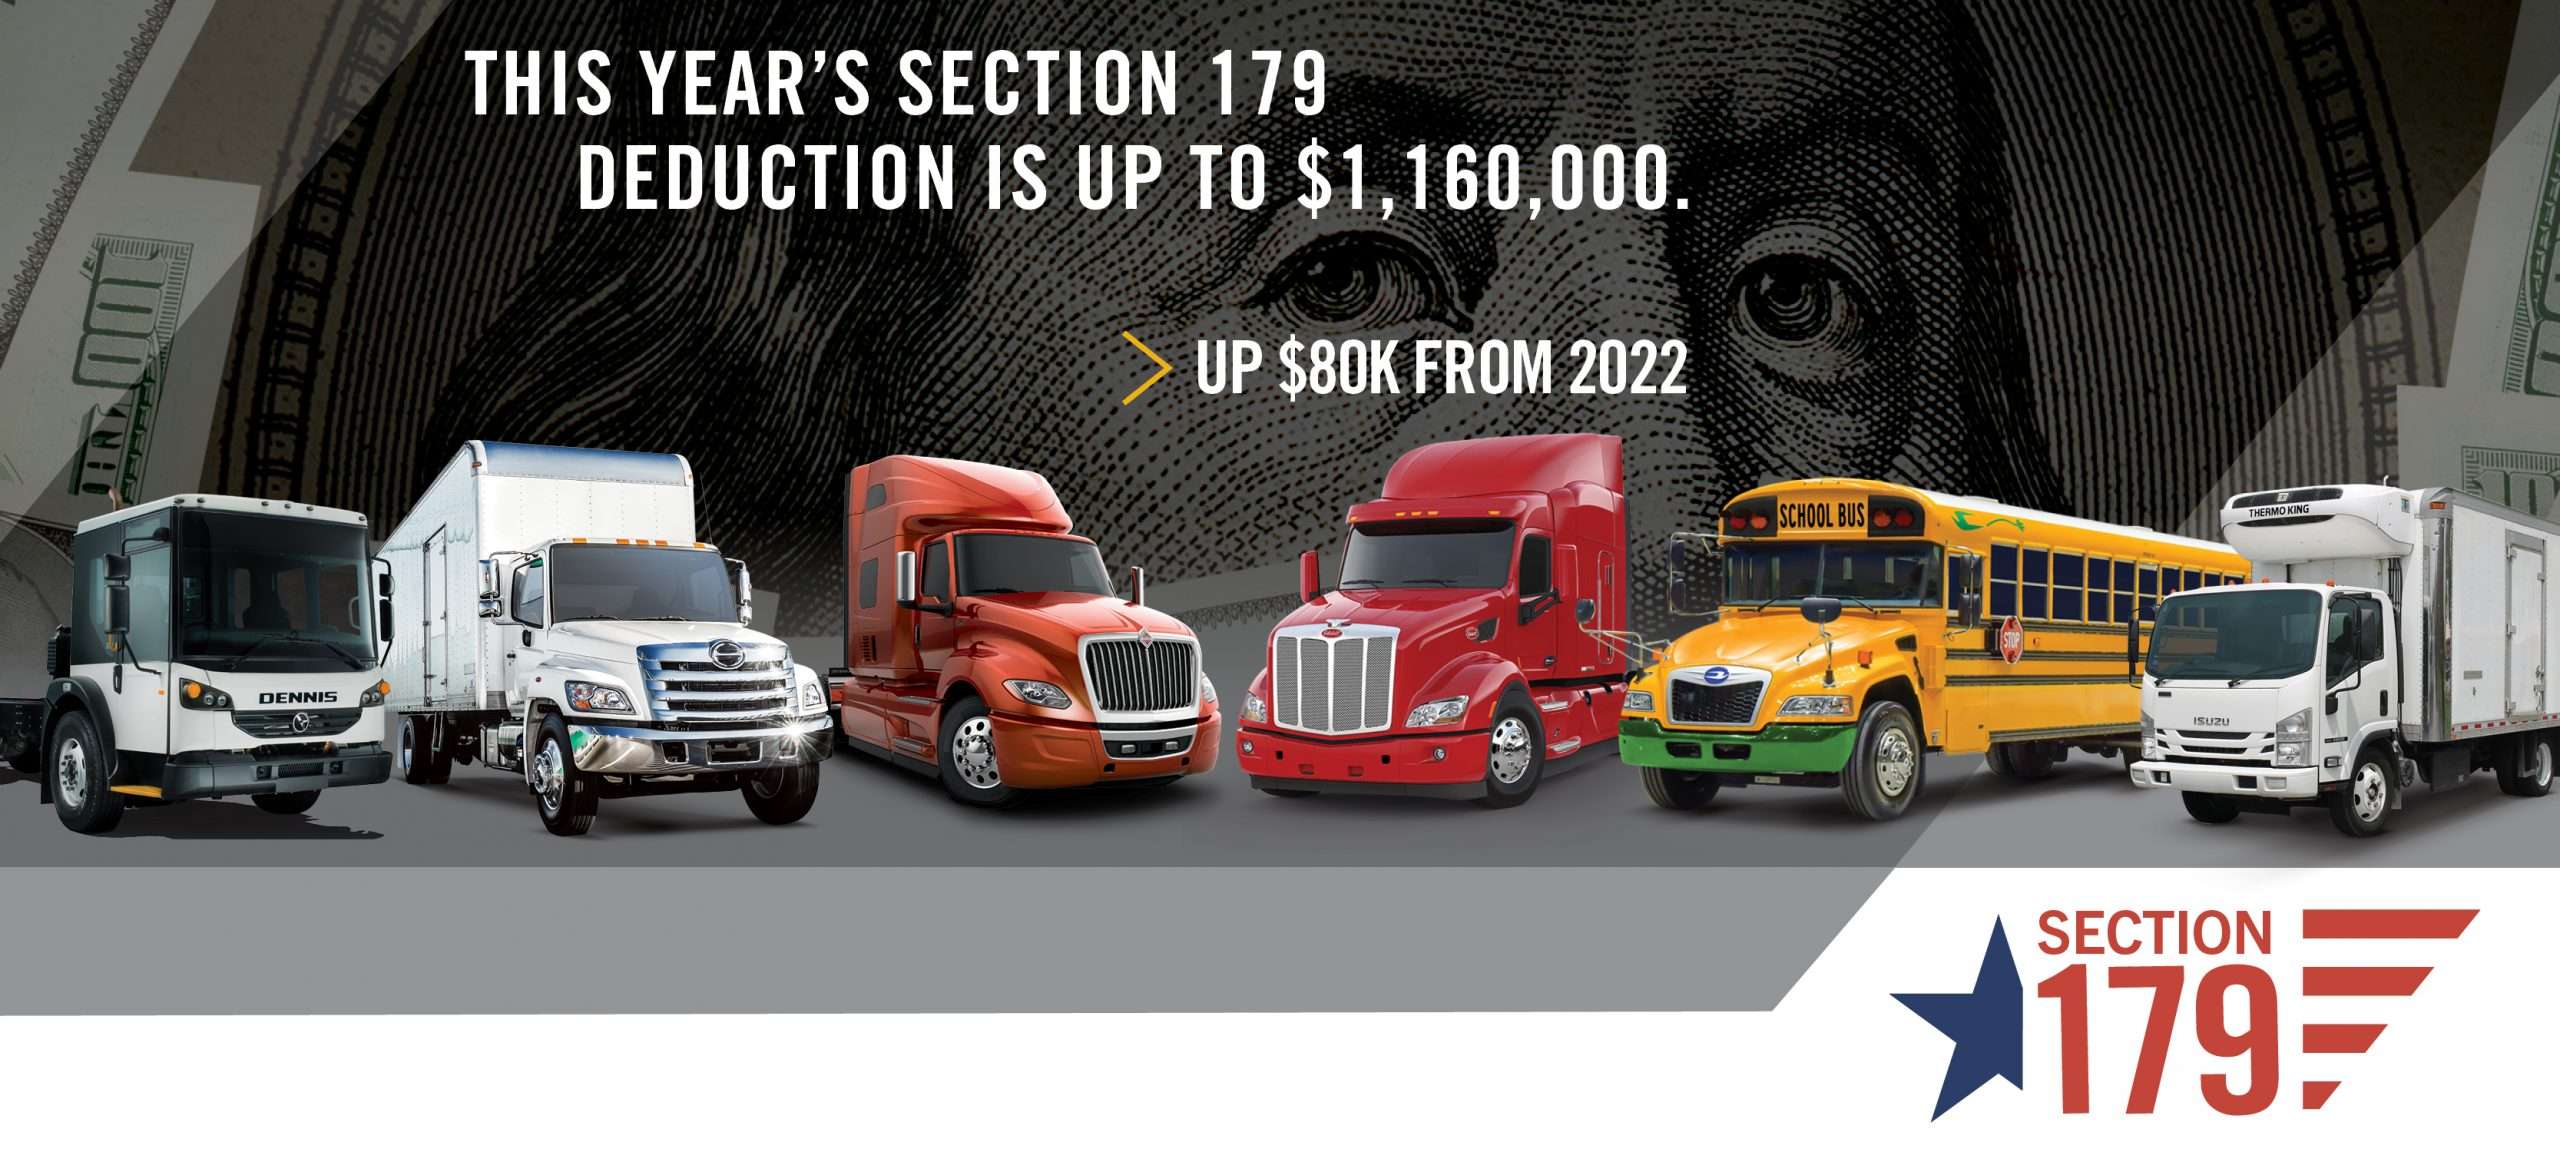 This Year's Section 179 Deduction is up to $1,160,000. Up $80K from 2022